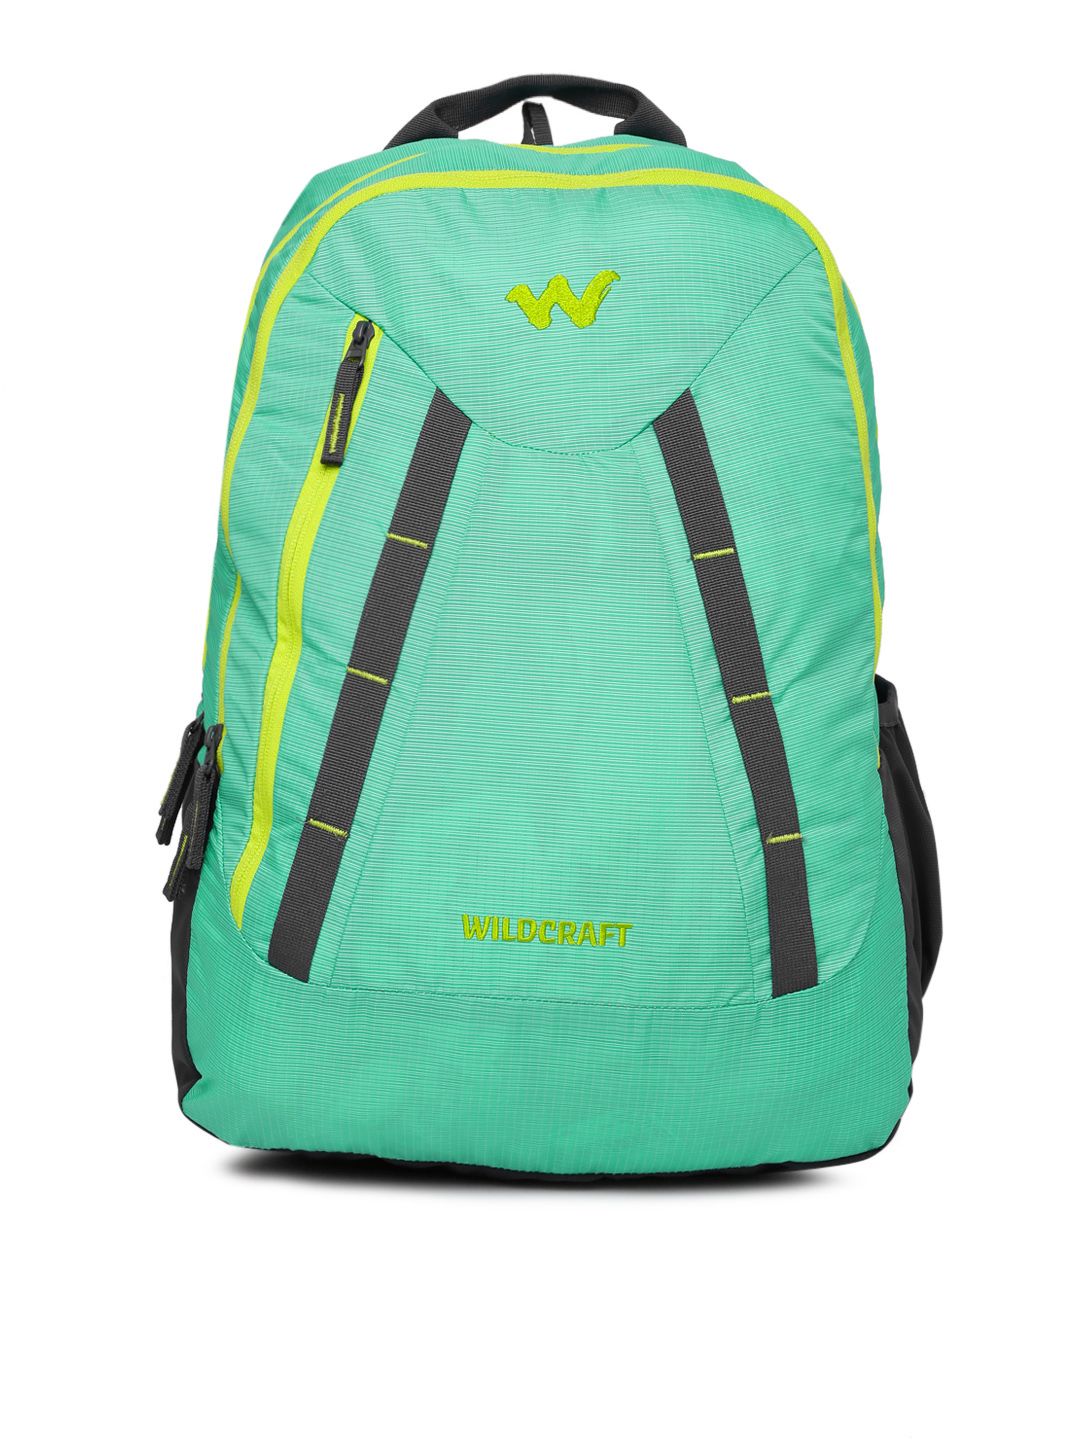 Wildcraft Unisex Green WC 3 Latlong 3 Backpack Price in India